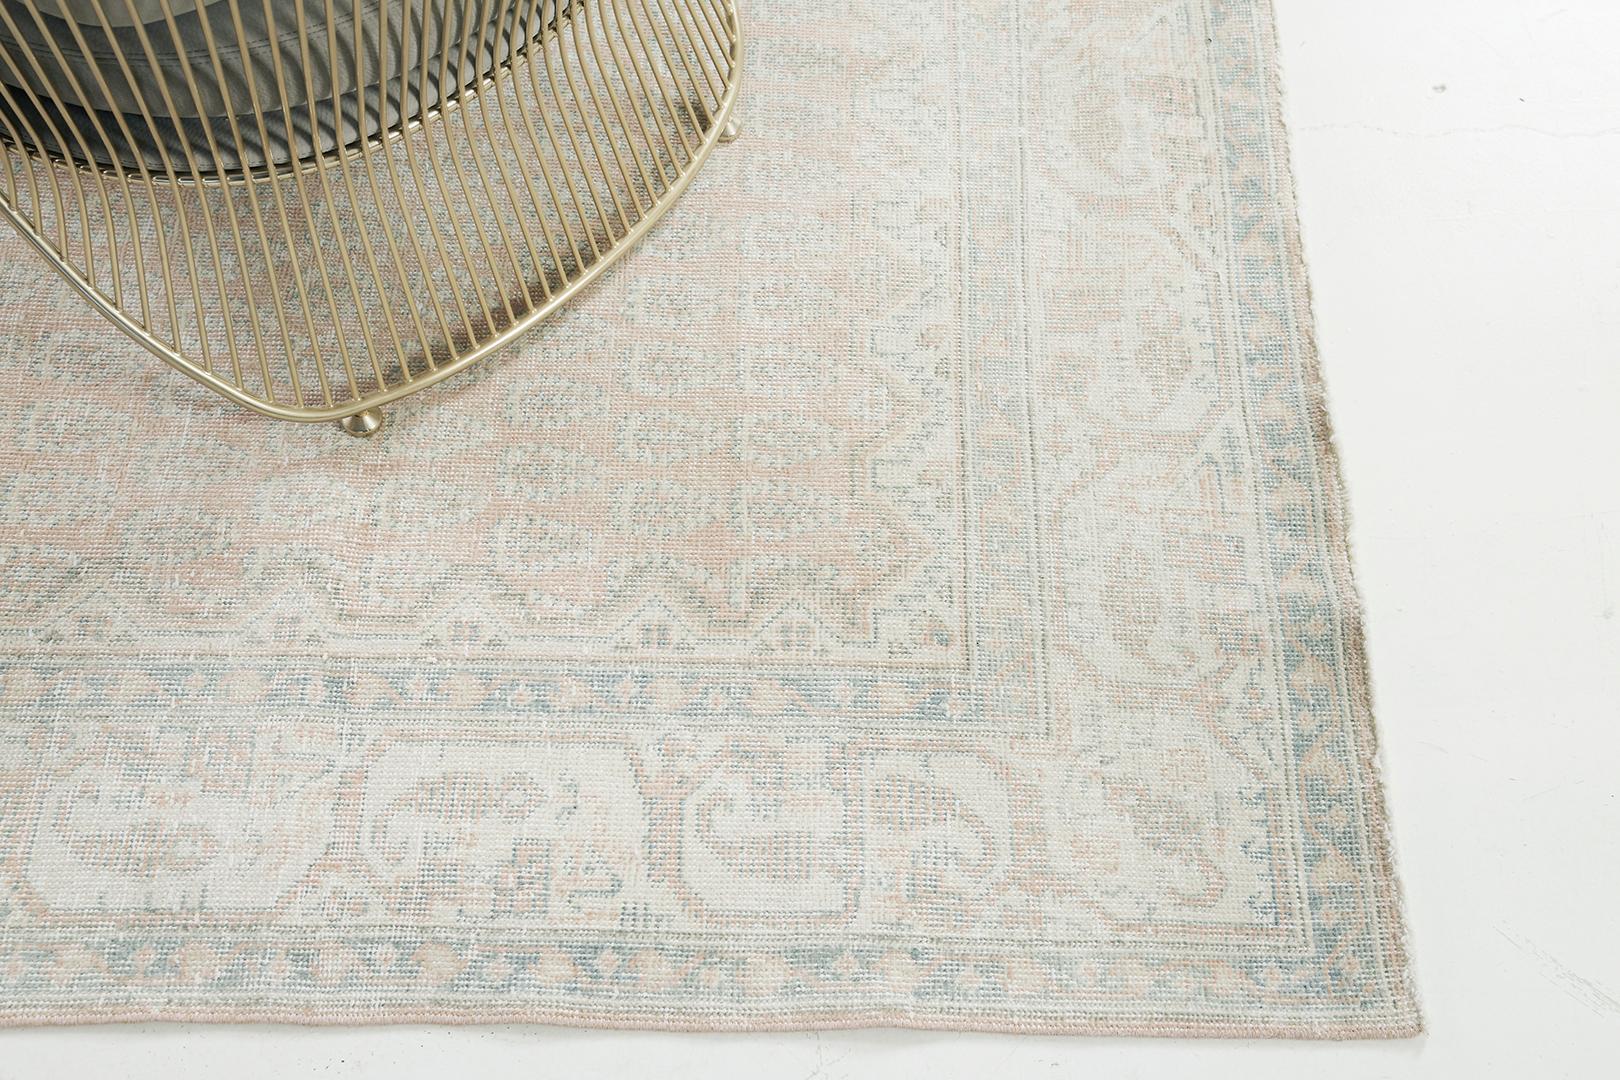 Soft elegance and warm earthy colors bring coordination to this Vintage Turkish Anatolian rug. It embodies the subtle Anatolian style featuring an allover botanical elements spread gracefully over the khaki field. A magnificent rug of timeless